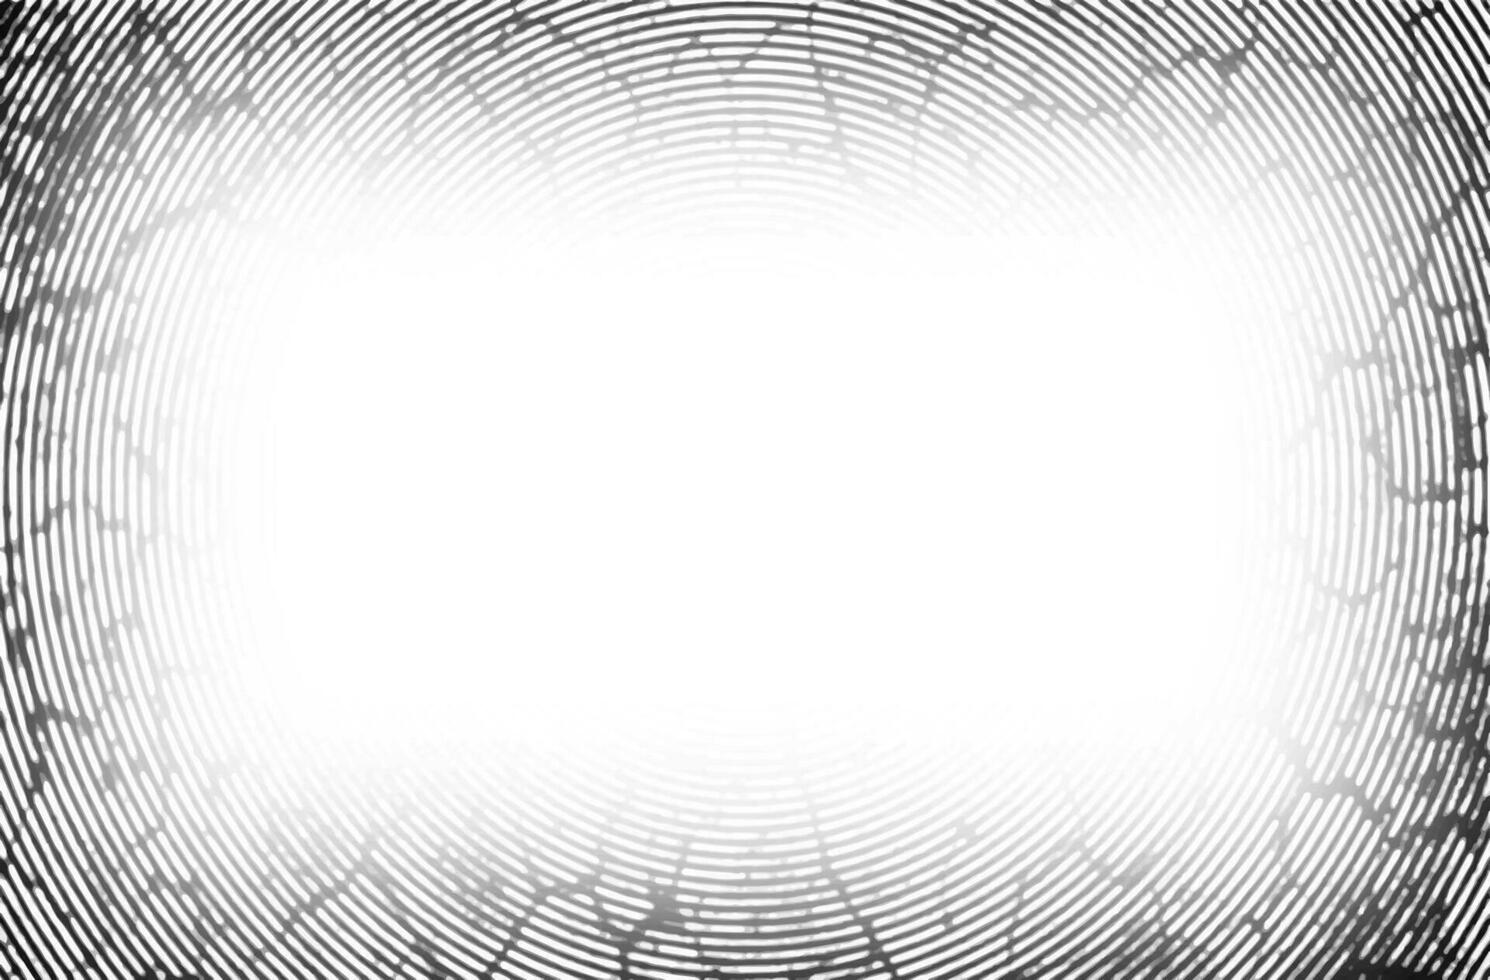 a black and white image of a fingerprint grunge borer frame vector, gradient banner circle texture frequency, background banner abstract square pattern circle frame vector